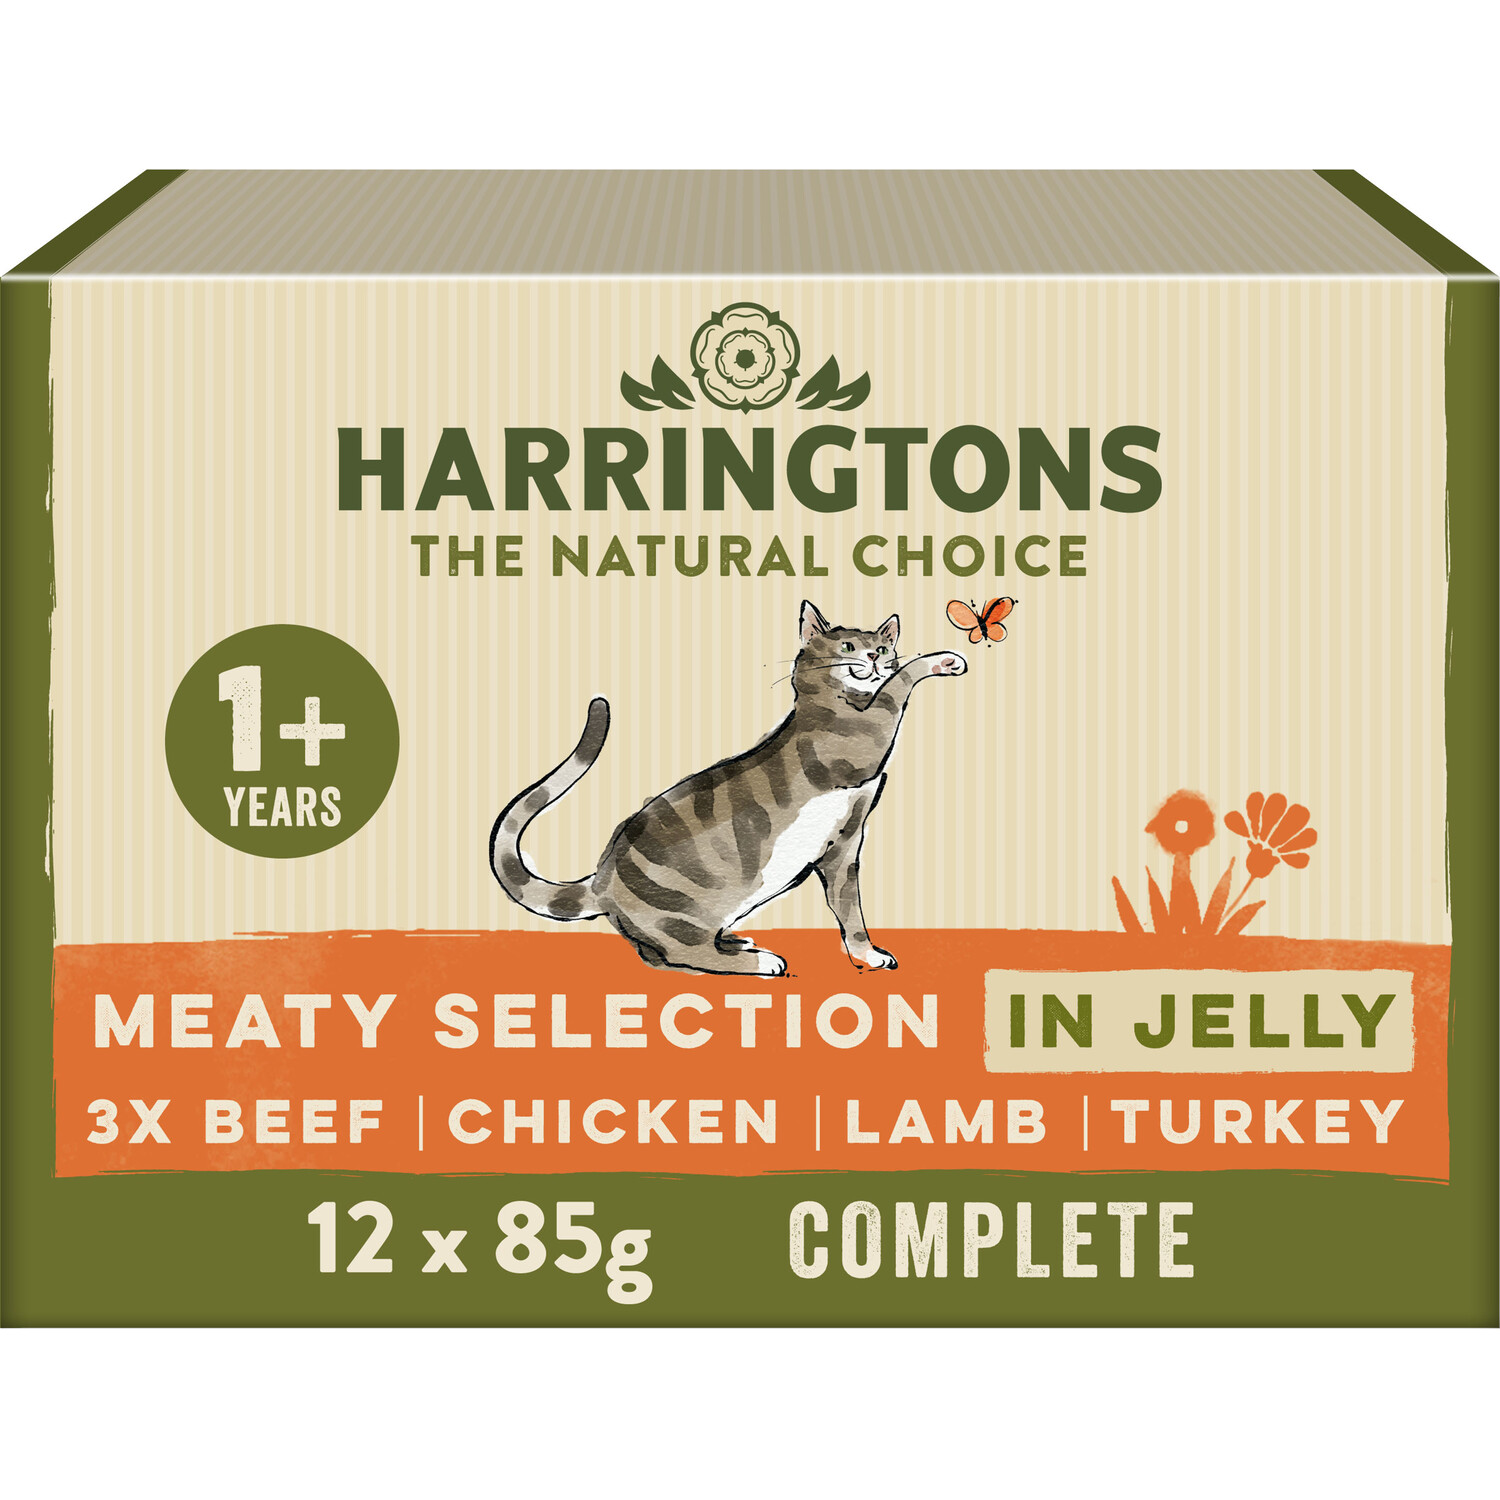 Harringtons Meaty Selection in Jelly Wet Cat Food 12 x 85g Image 1